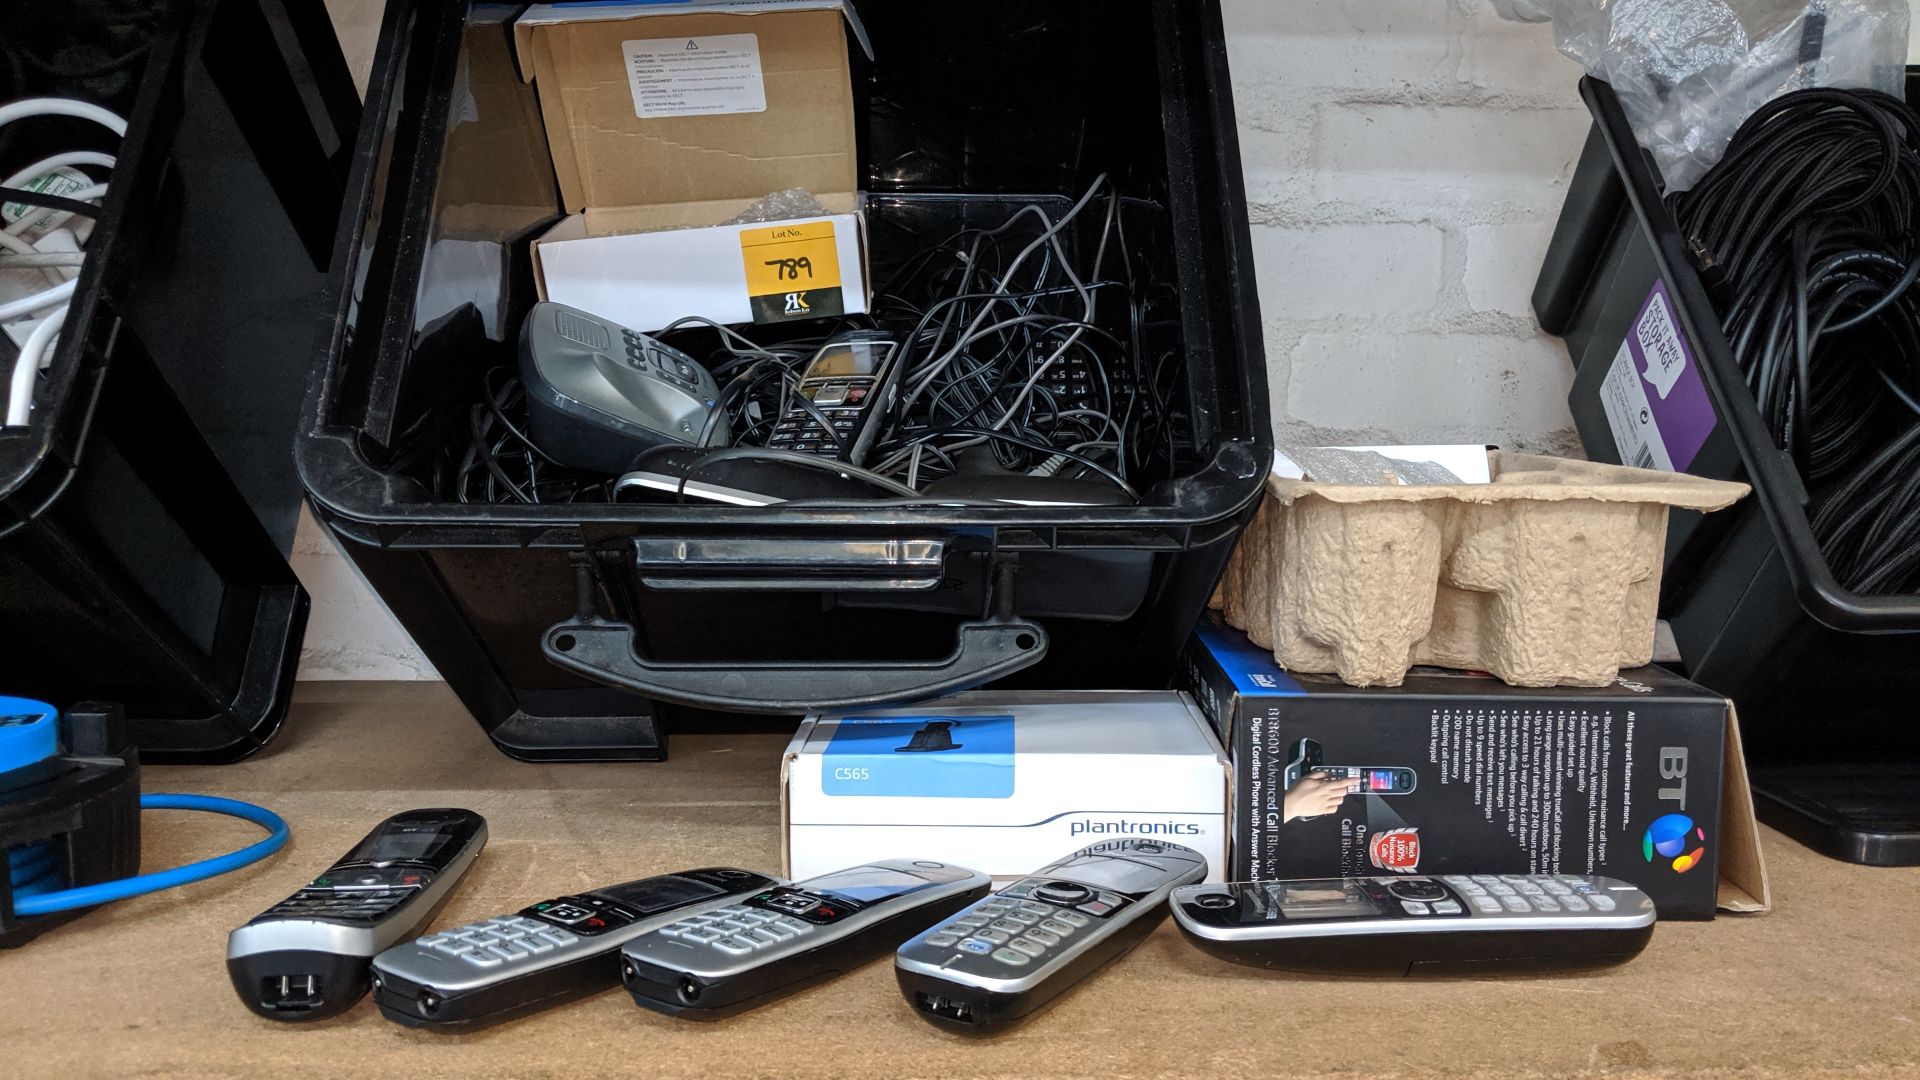 Contents of a crate of DECT telephone equipment - crate excluded. This is one of a large number of